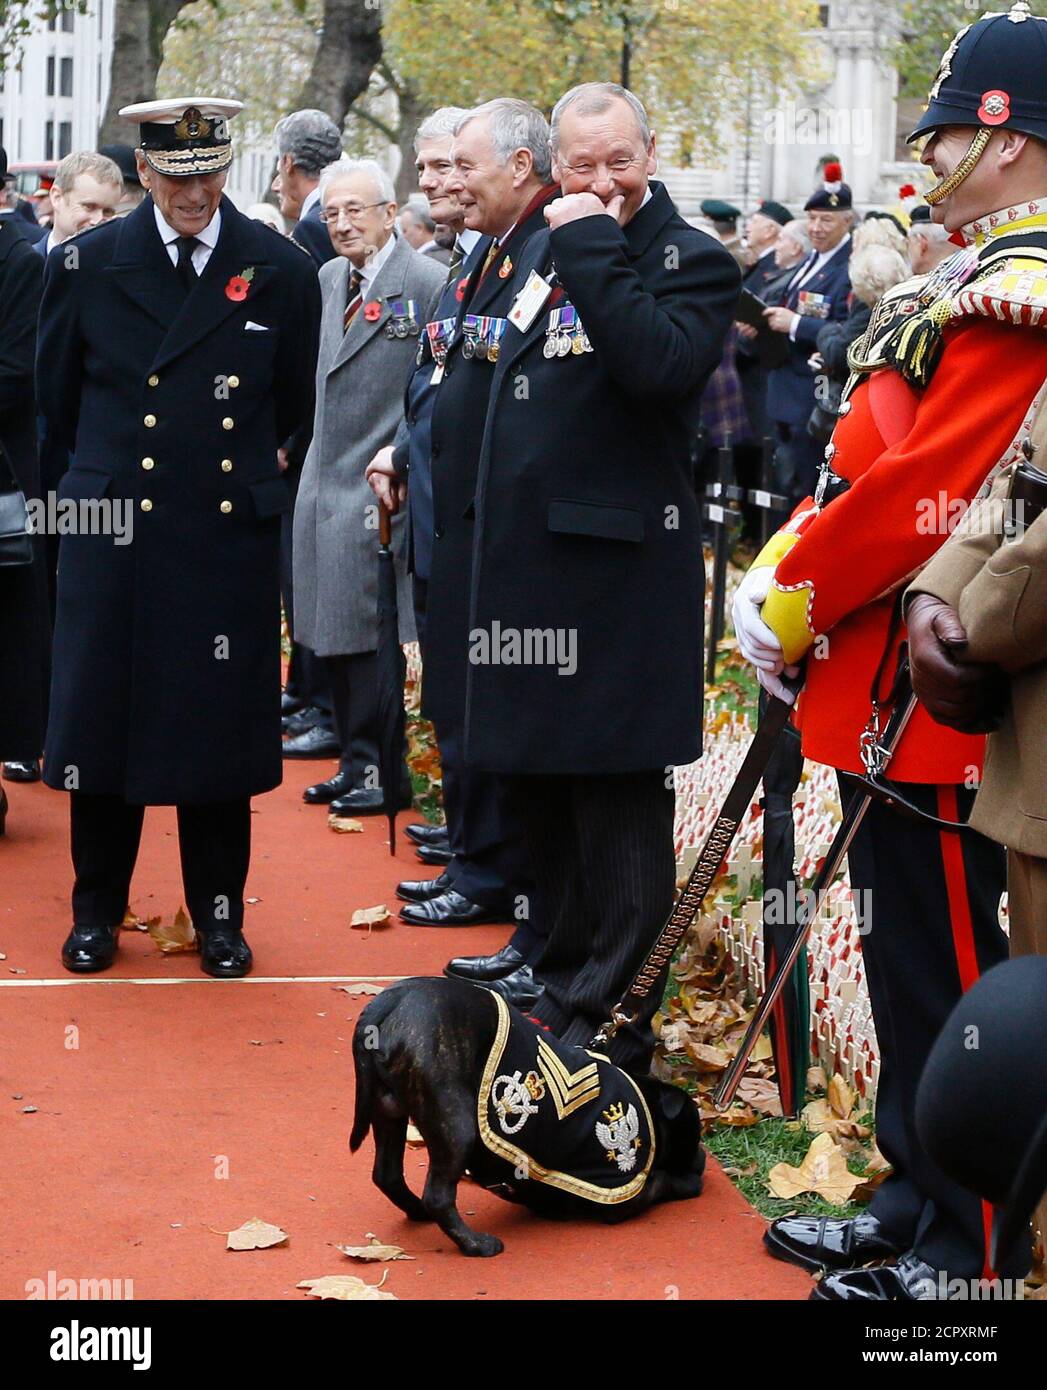 Britain's Prince Philip (L) looks at Watchman V, the mascot for the Staffordshire Regiment Association, during a visit to the Field of Remembrance at Westminster Abbey in London, Britain November 5, 2015. REUTERS/Kirsty Wigglesworth/pool Stock Photo